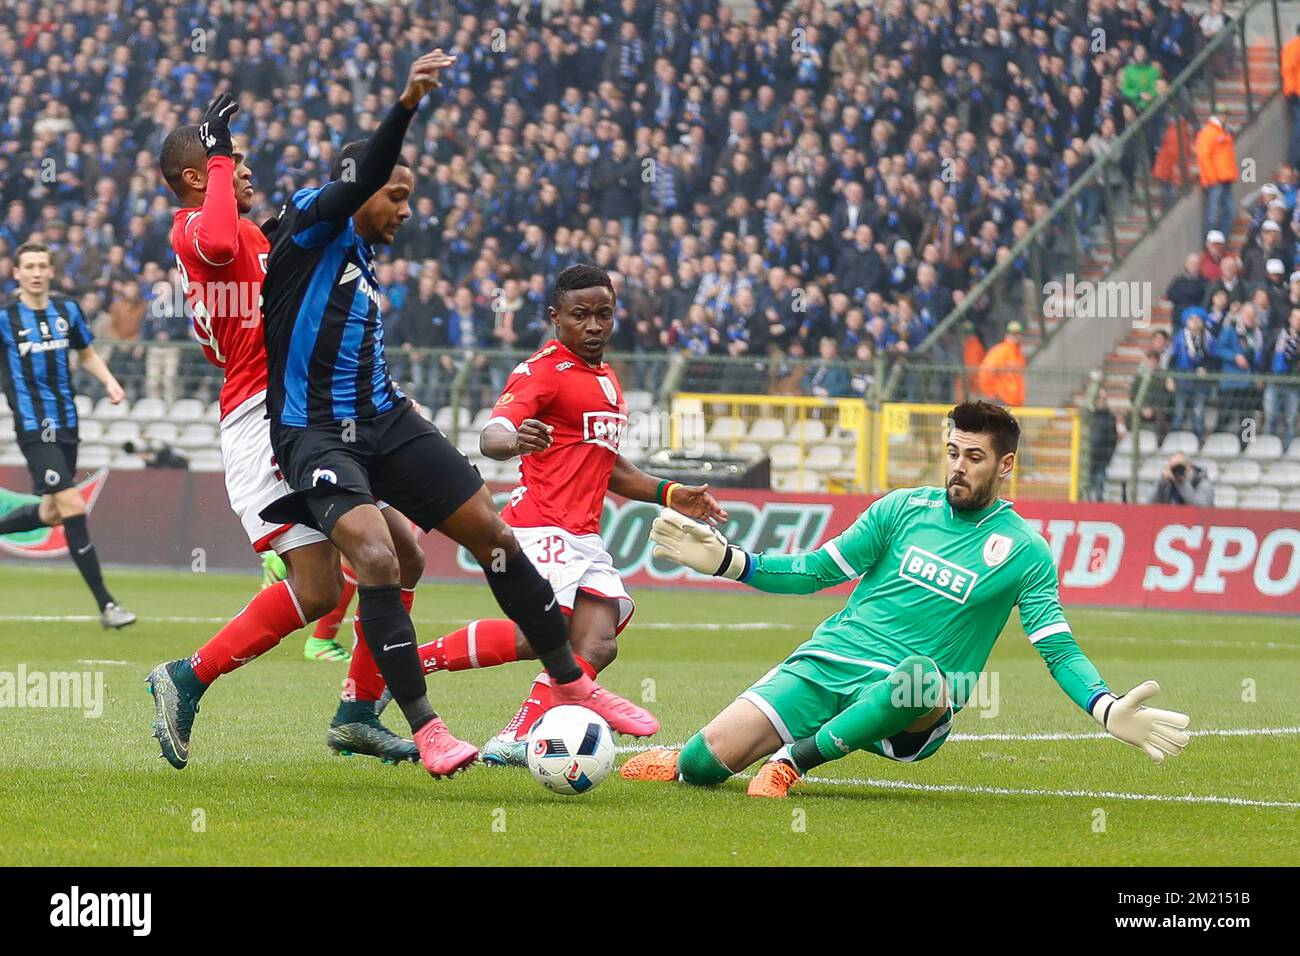 Club's Jose Izquierdo and Standard's goalkeeper Victor Valdes Arriba fight for the ball during the Croky Cup final between Belgian soccer teams Club Brugge and Standard de Liege, on Sunday 20 March 2016, in Brussels.  Stock Photo